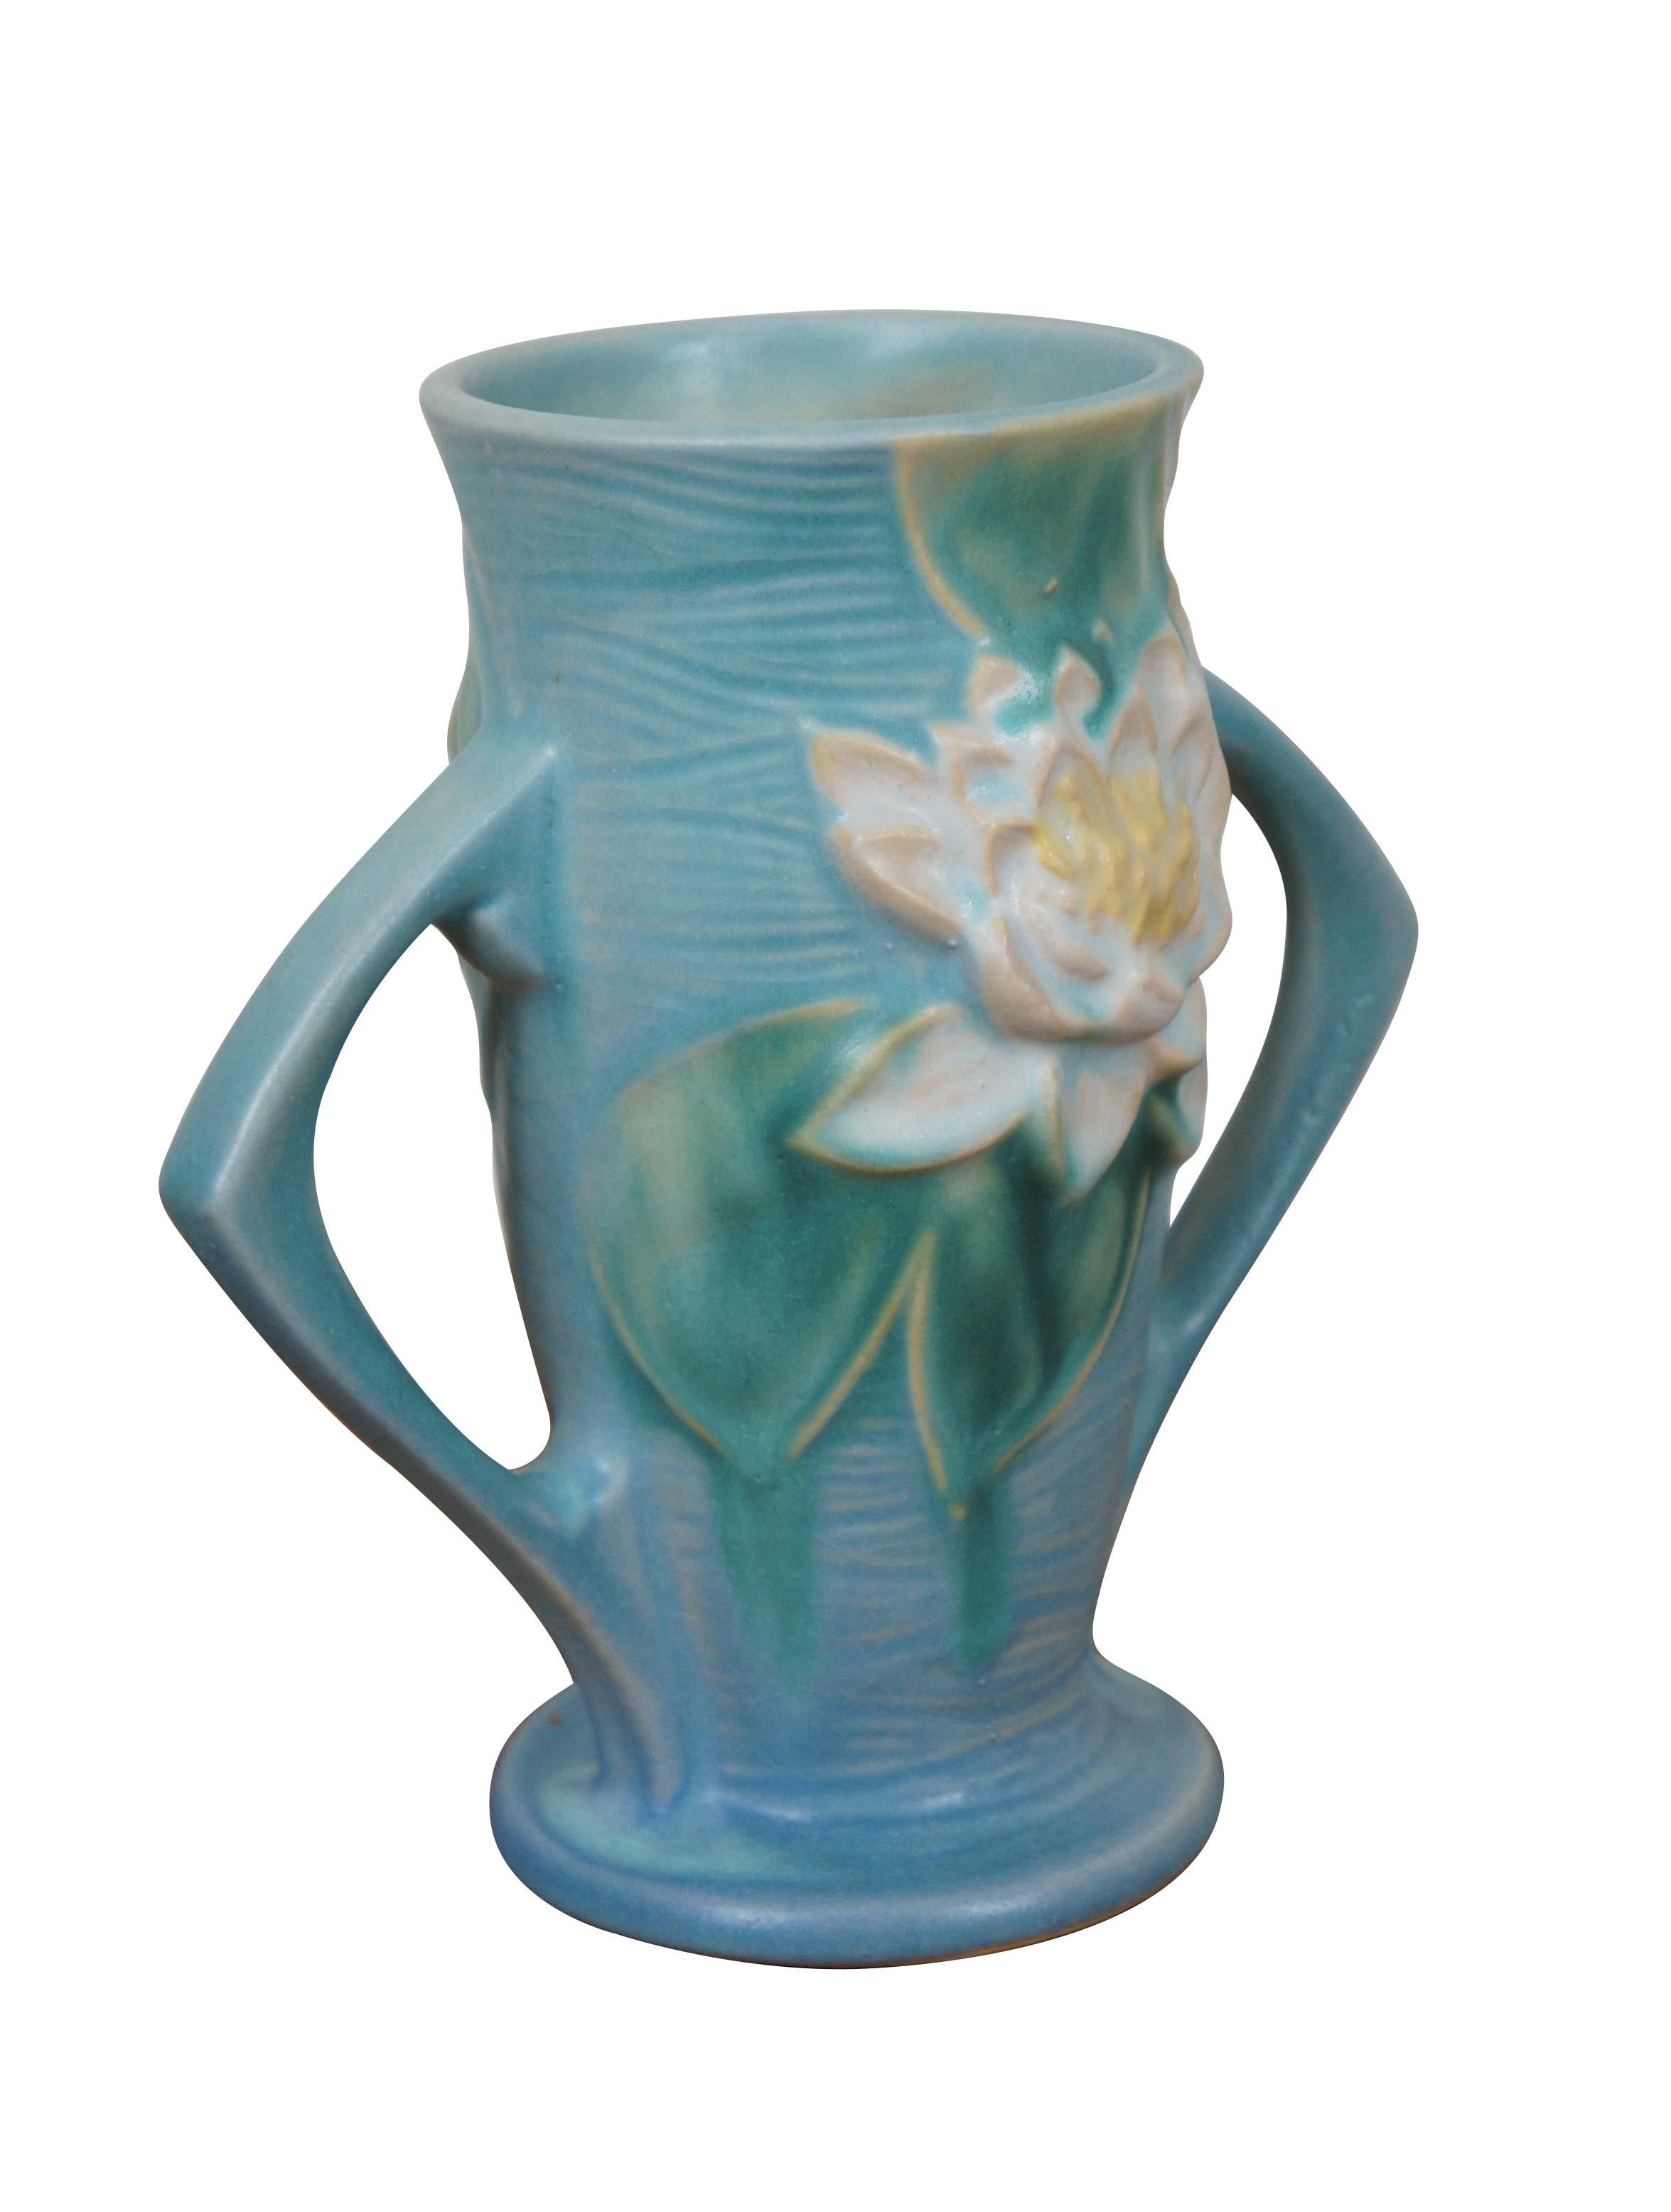 Pair of circa 1940s Roseville USA ceramic vases, number 72-6. Footed cylindrical form with triangular double handles / ears, blue water texture with water lilies / lily pads. The Water Lily pattern was introduced in 1943.

